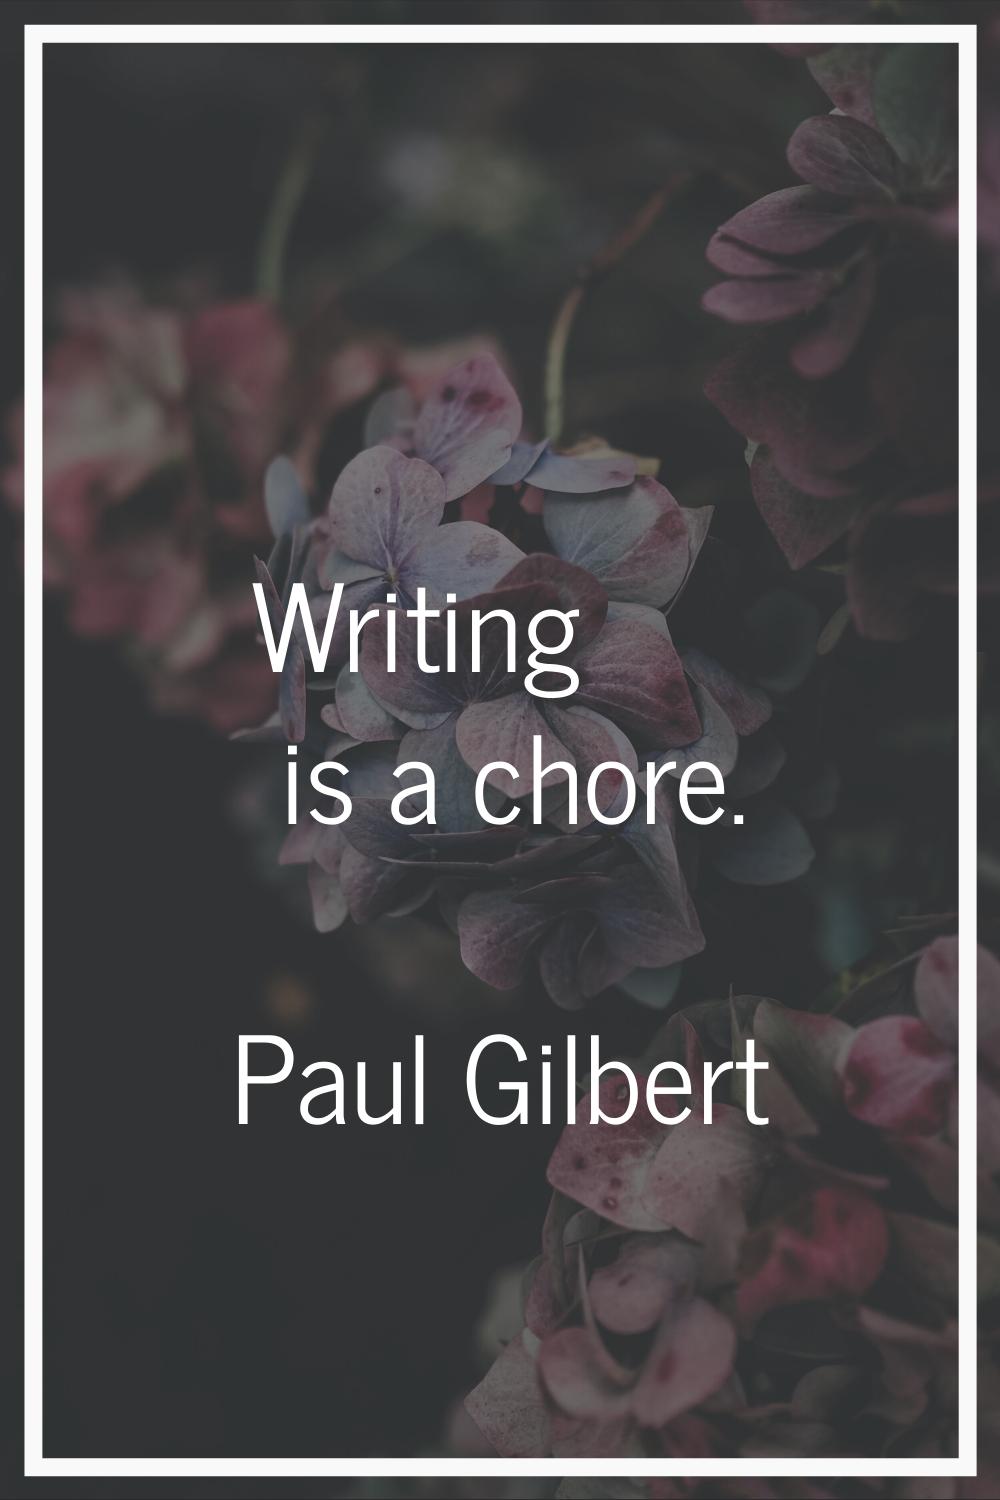 Writing is a chore.